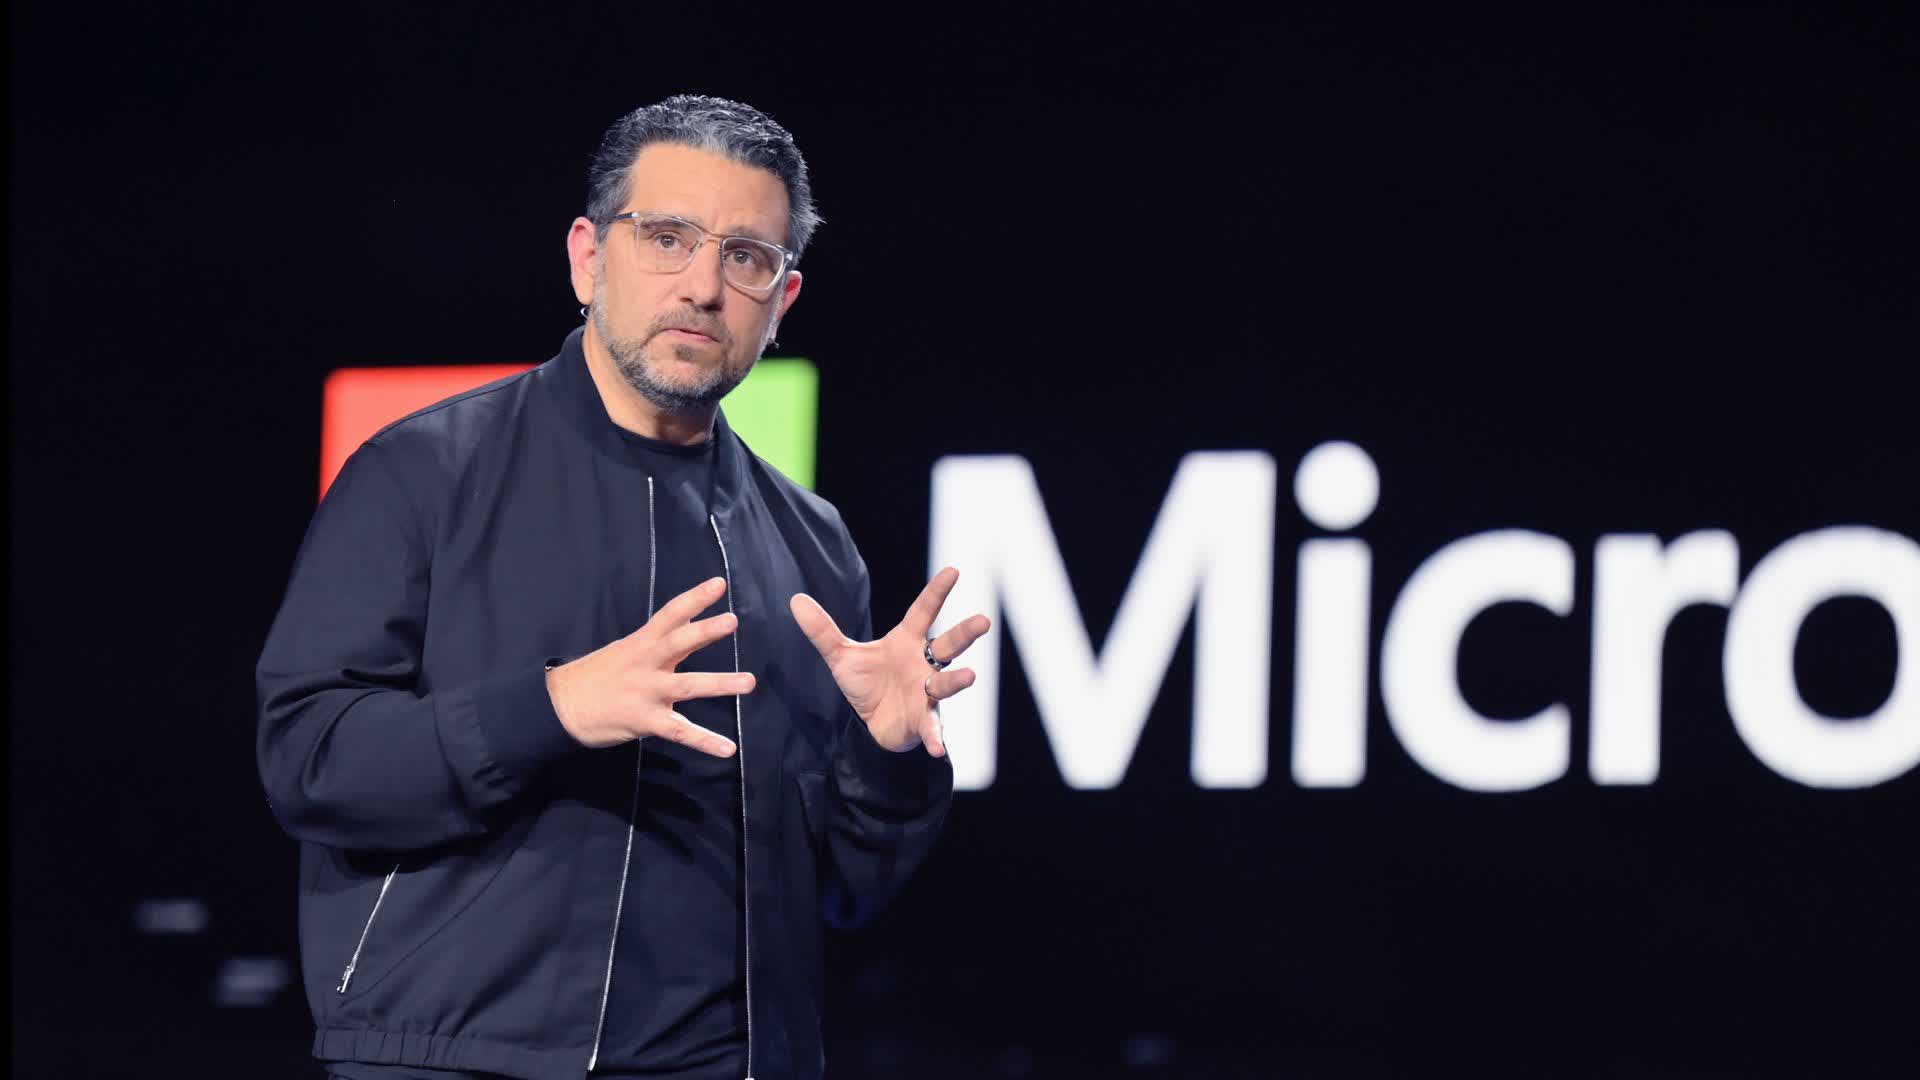 Panos Panay, Microsoft's Chief Product Officer, steps down after nearly 20 years